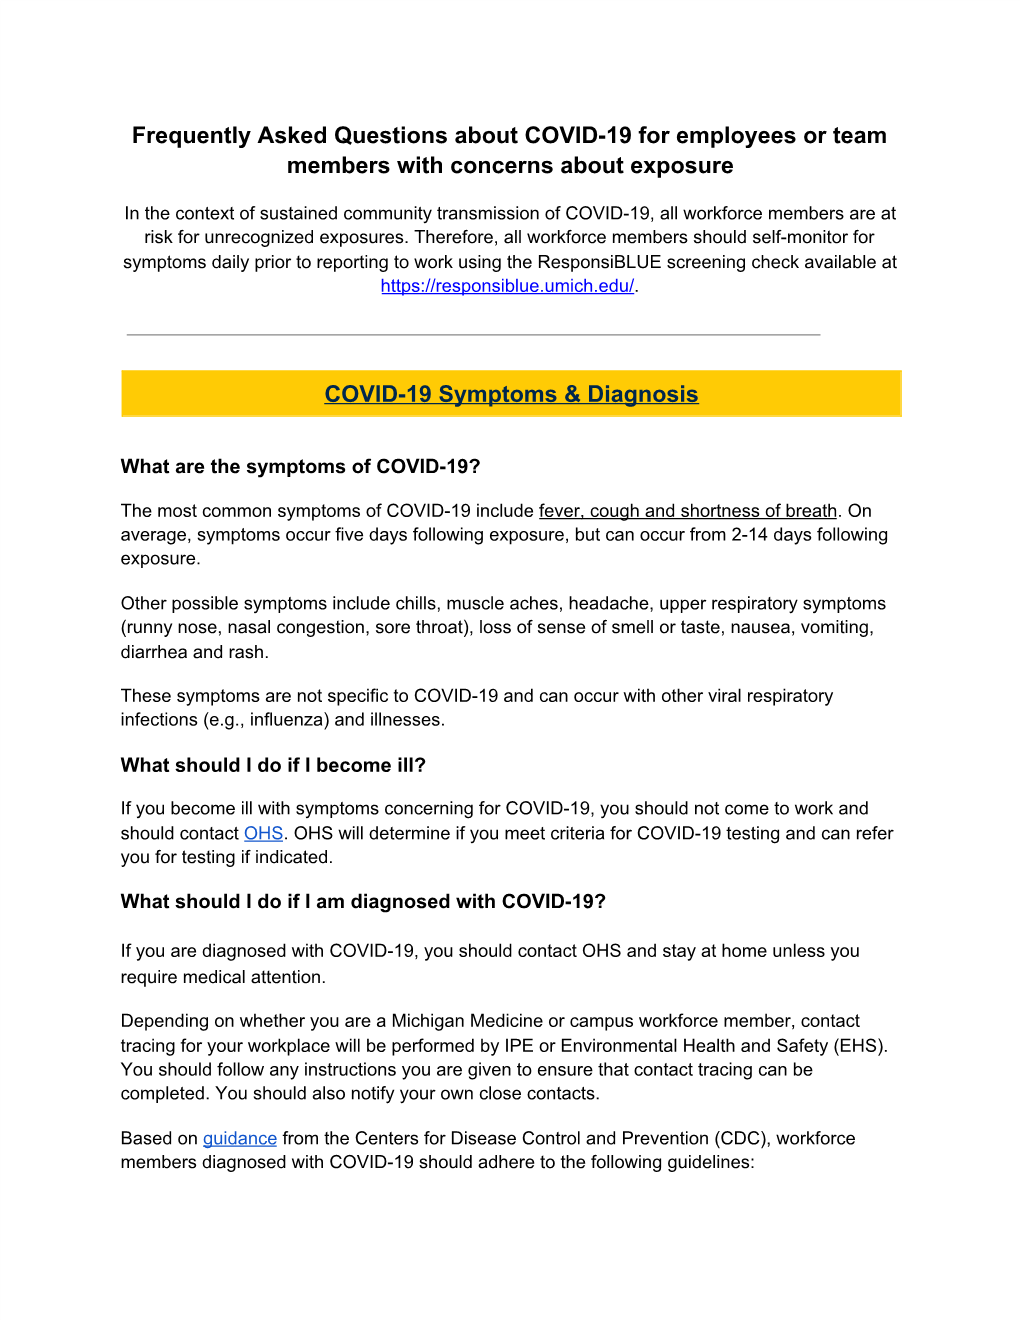 Frequently Asked Questions About COVID-19 for Employees Or Team Members with Concerns About Exposure COVID-19 Symptoms &